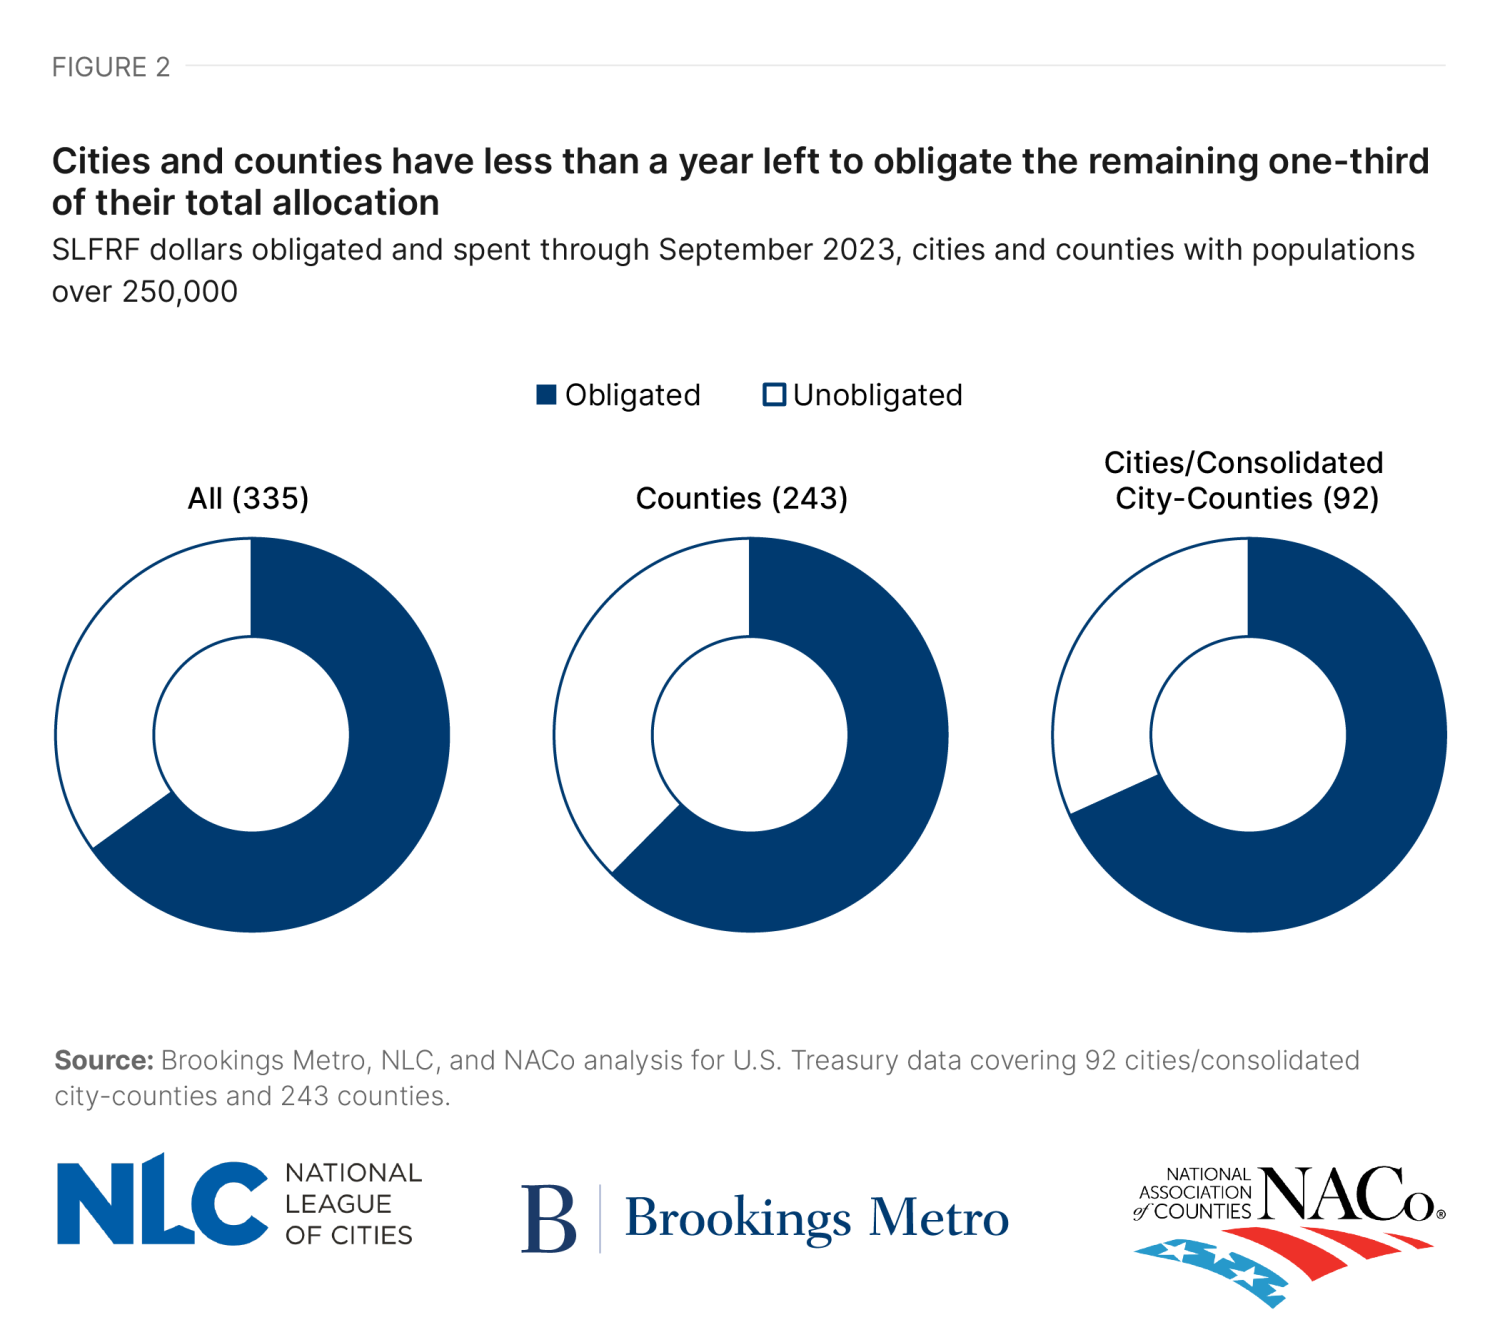 Figure 2: Cities and counties have less than a year left to obligate the remaining one-third of their total allocation